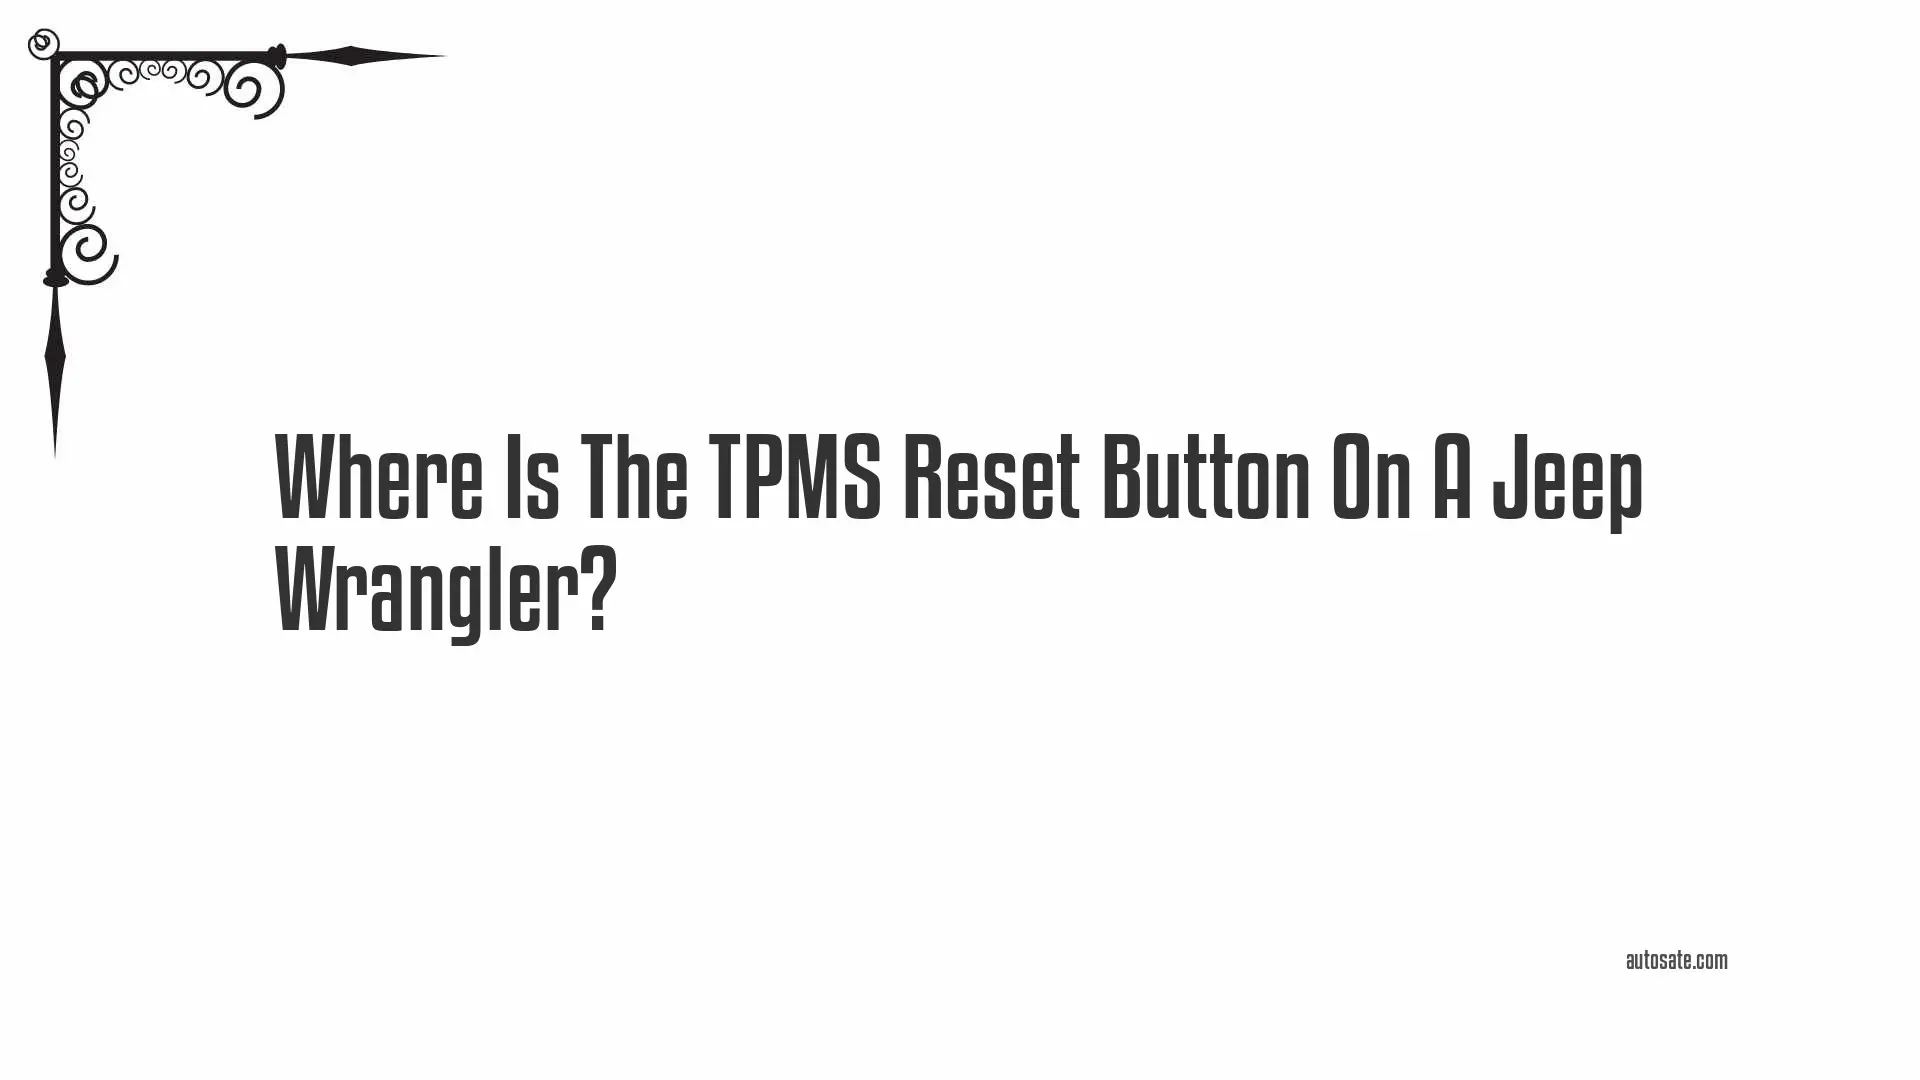 Where Is The TPMS Reset Button On A Jeep Wrangler?